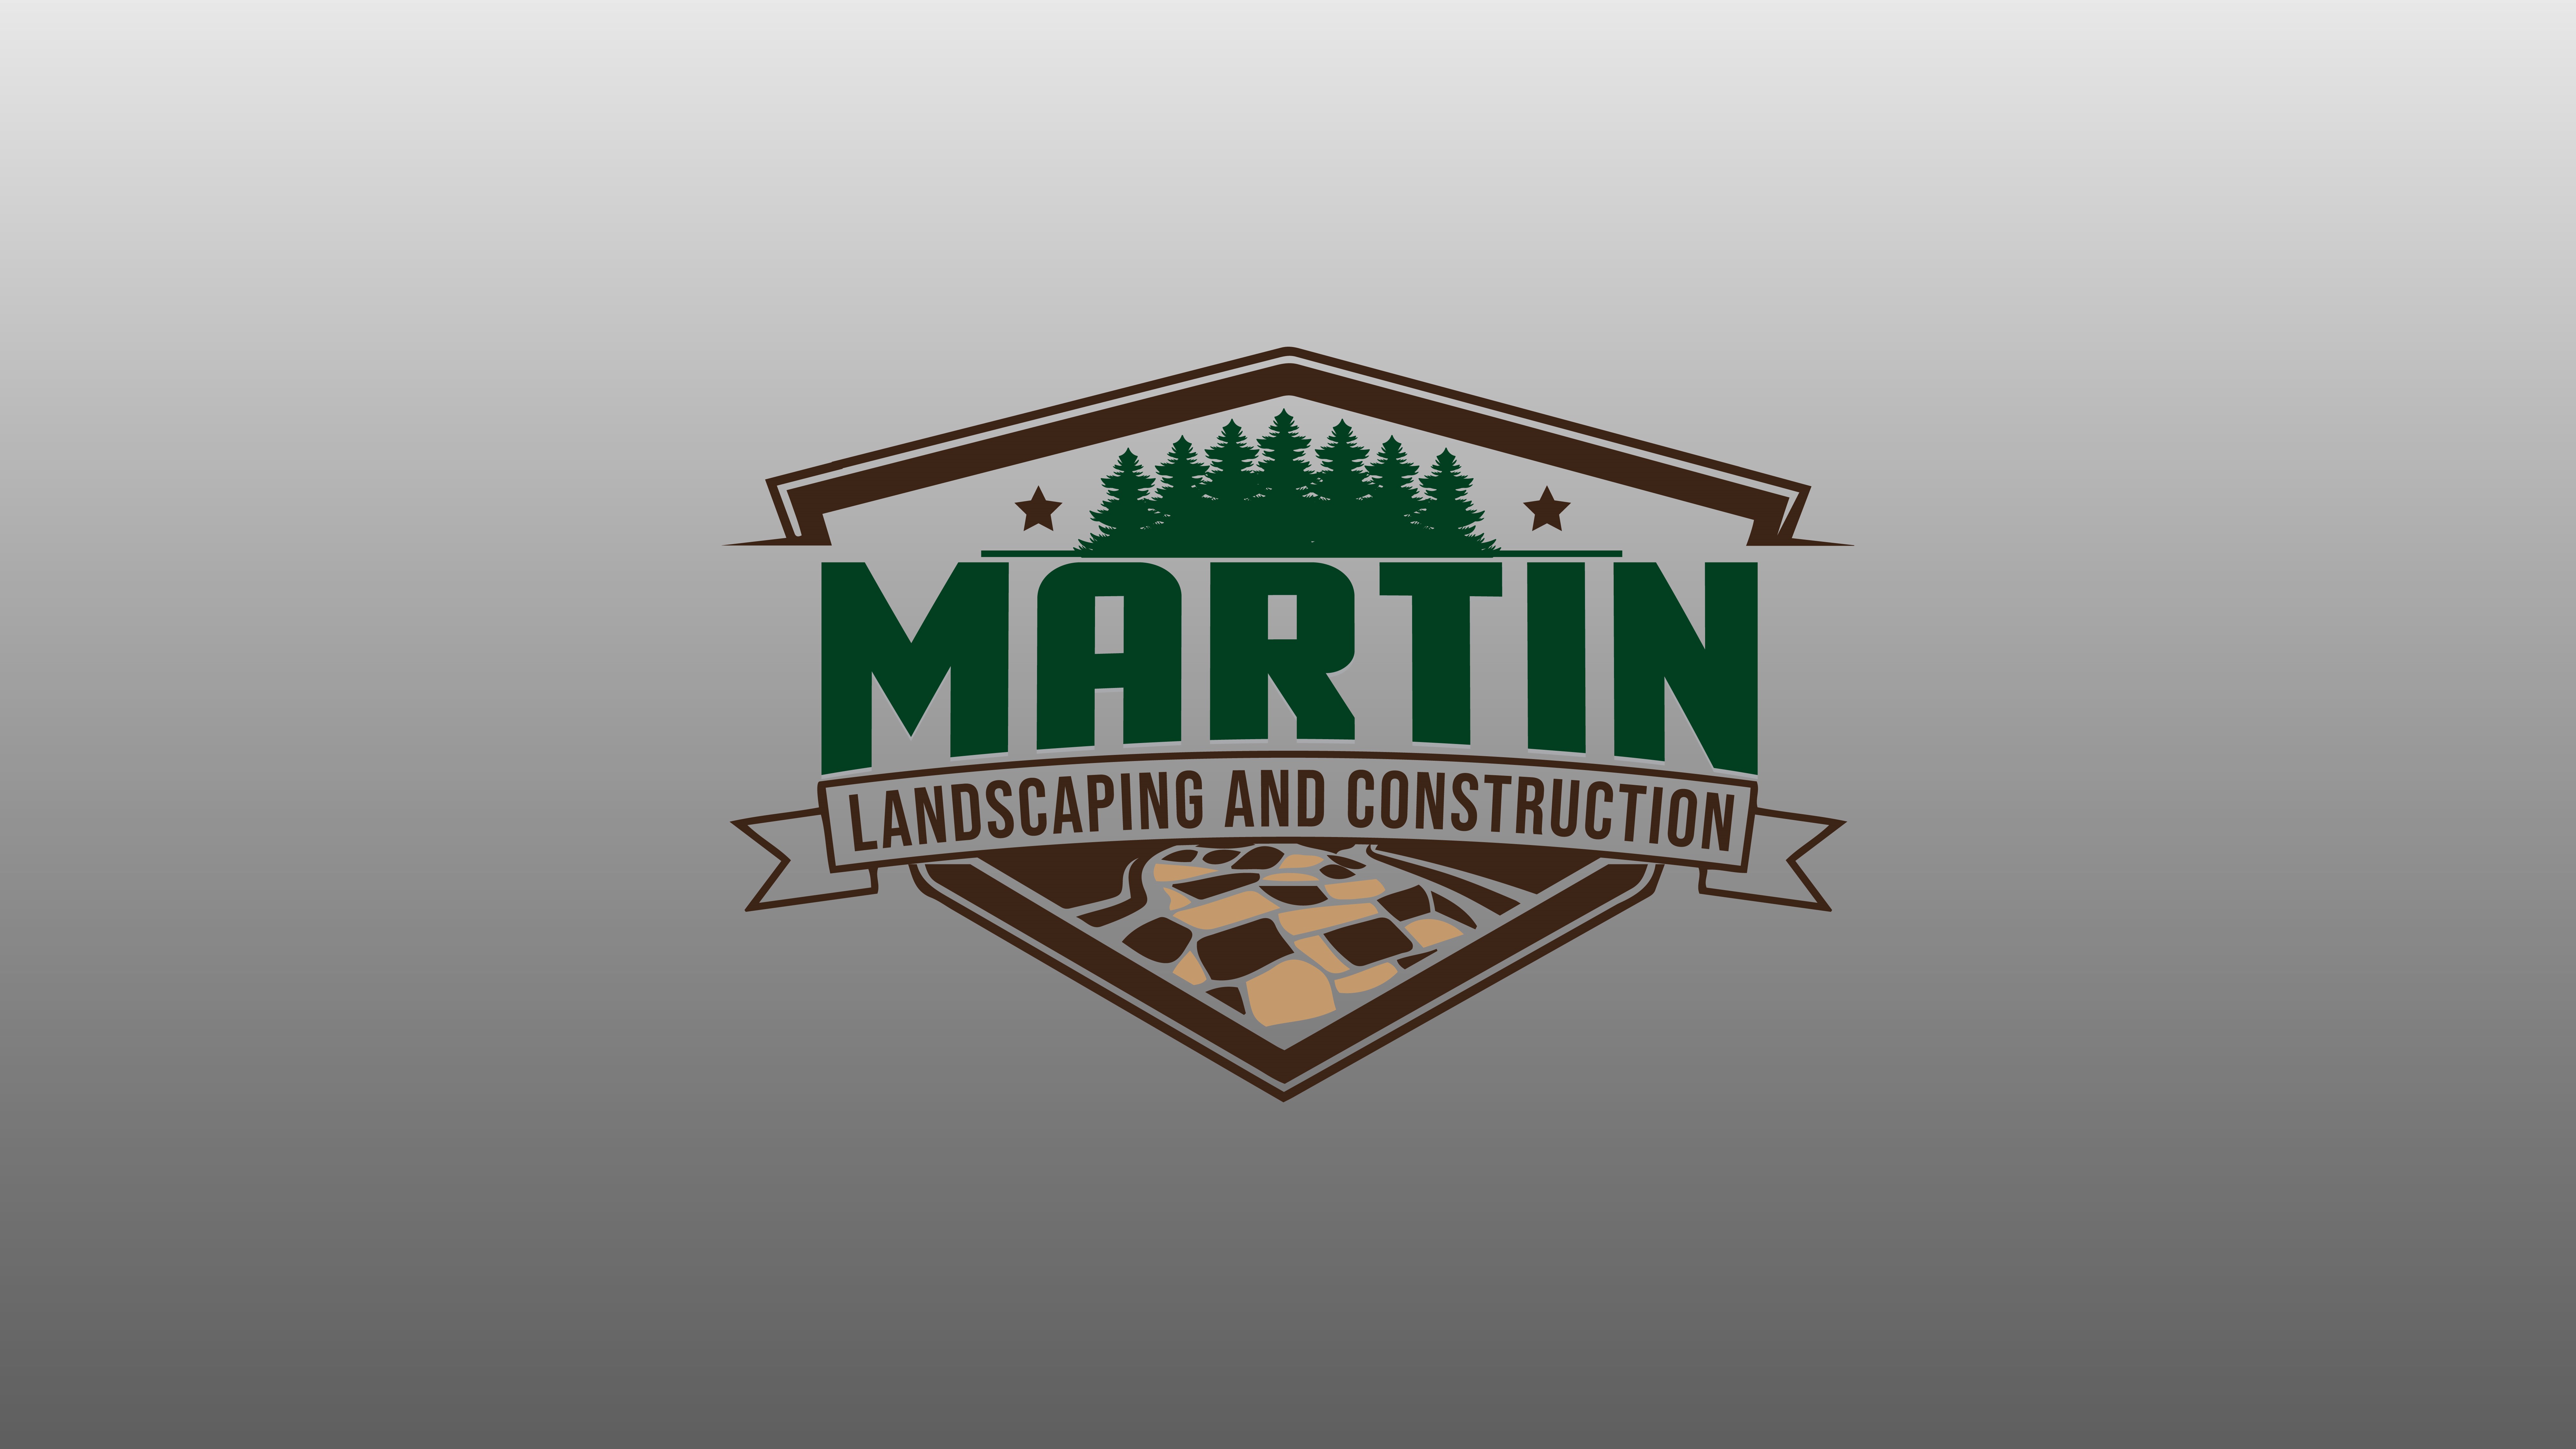 Martin Landscaping and Construction Logo